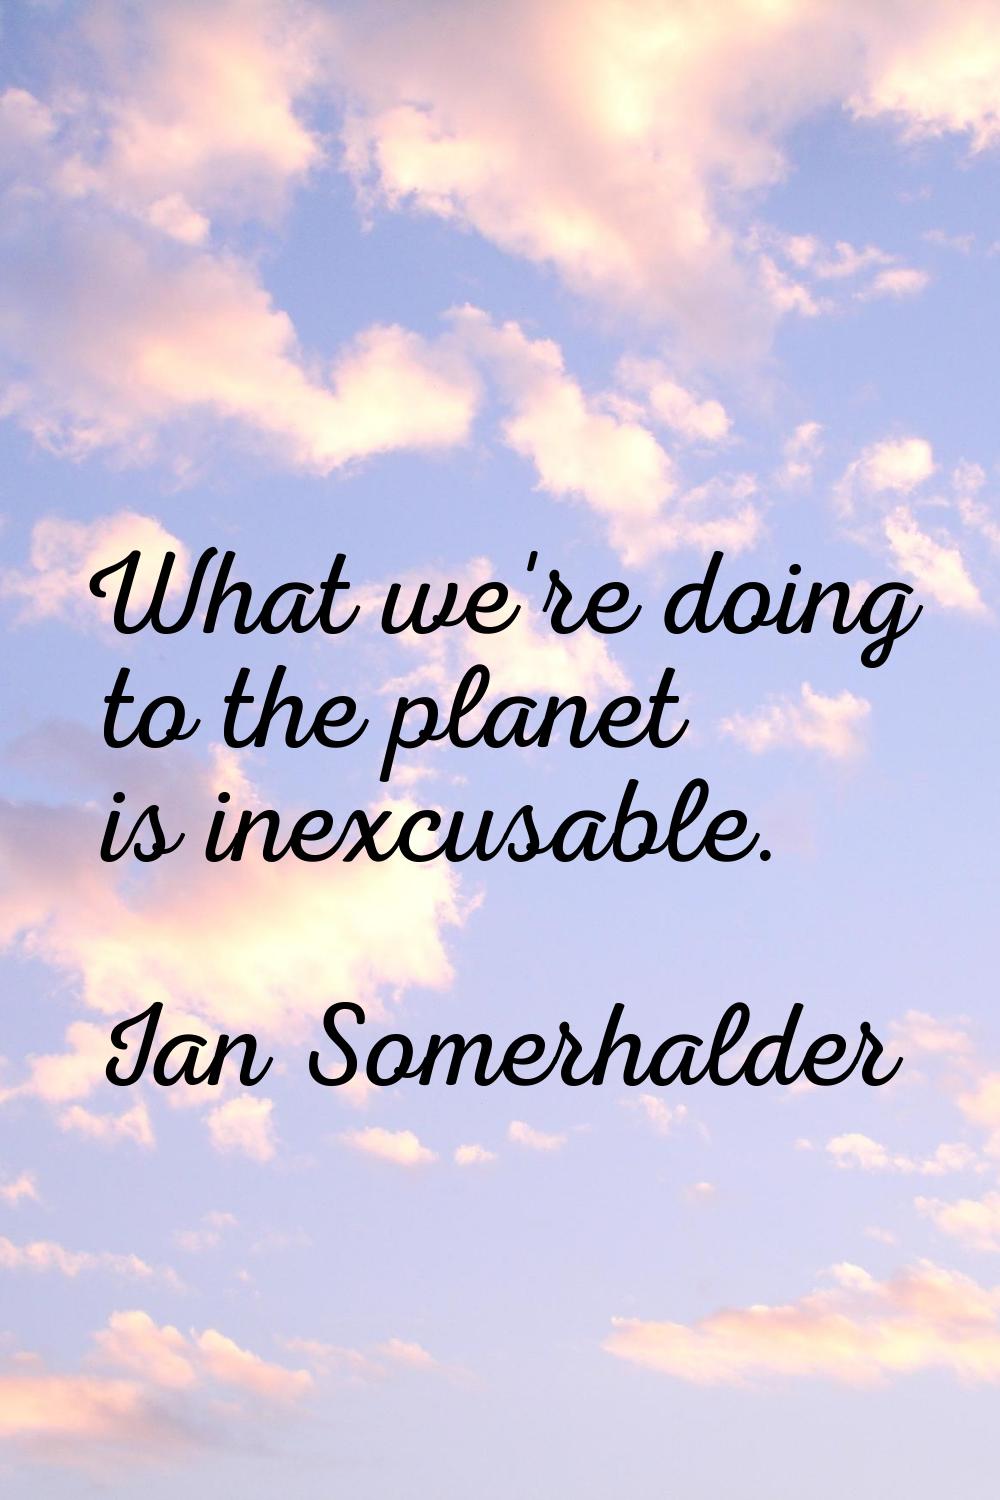 What we're doing to the planet is inexcusable.